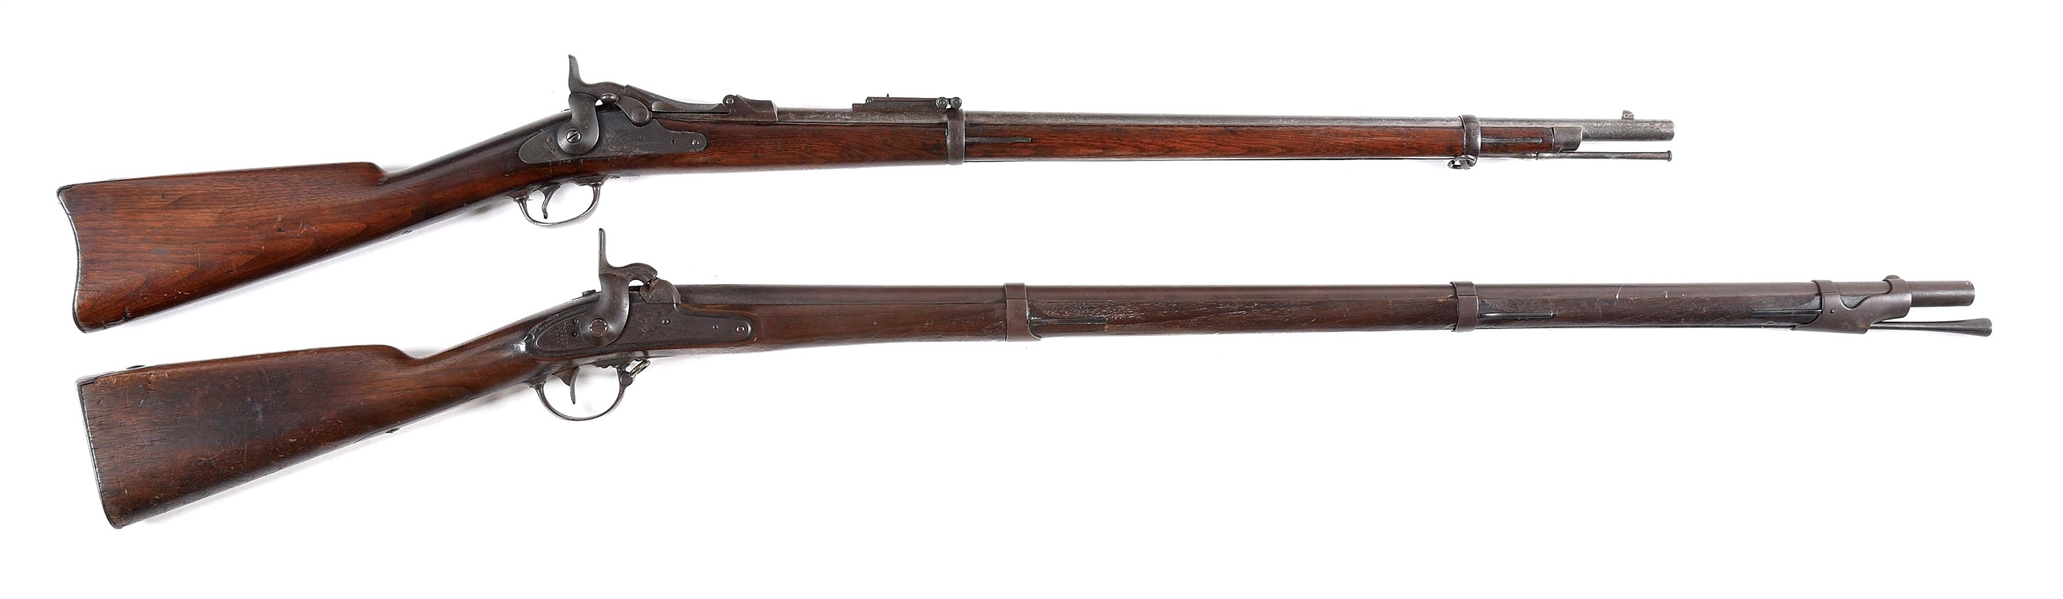 (A) LOT OF 2: SPRINGFIELD 84 AND HARPERS FERRY 1842 PERCUSSION RIFLES.